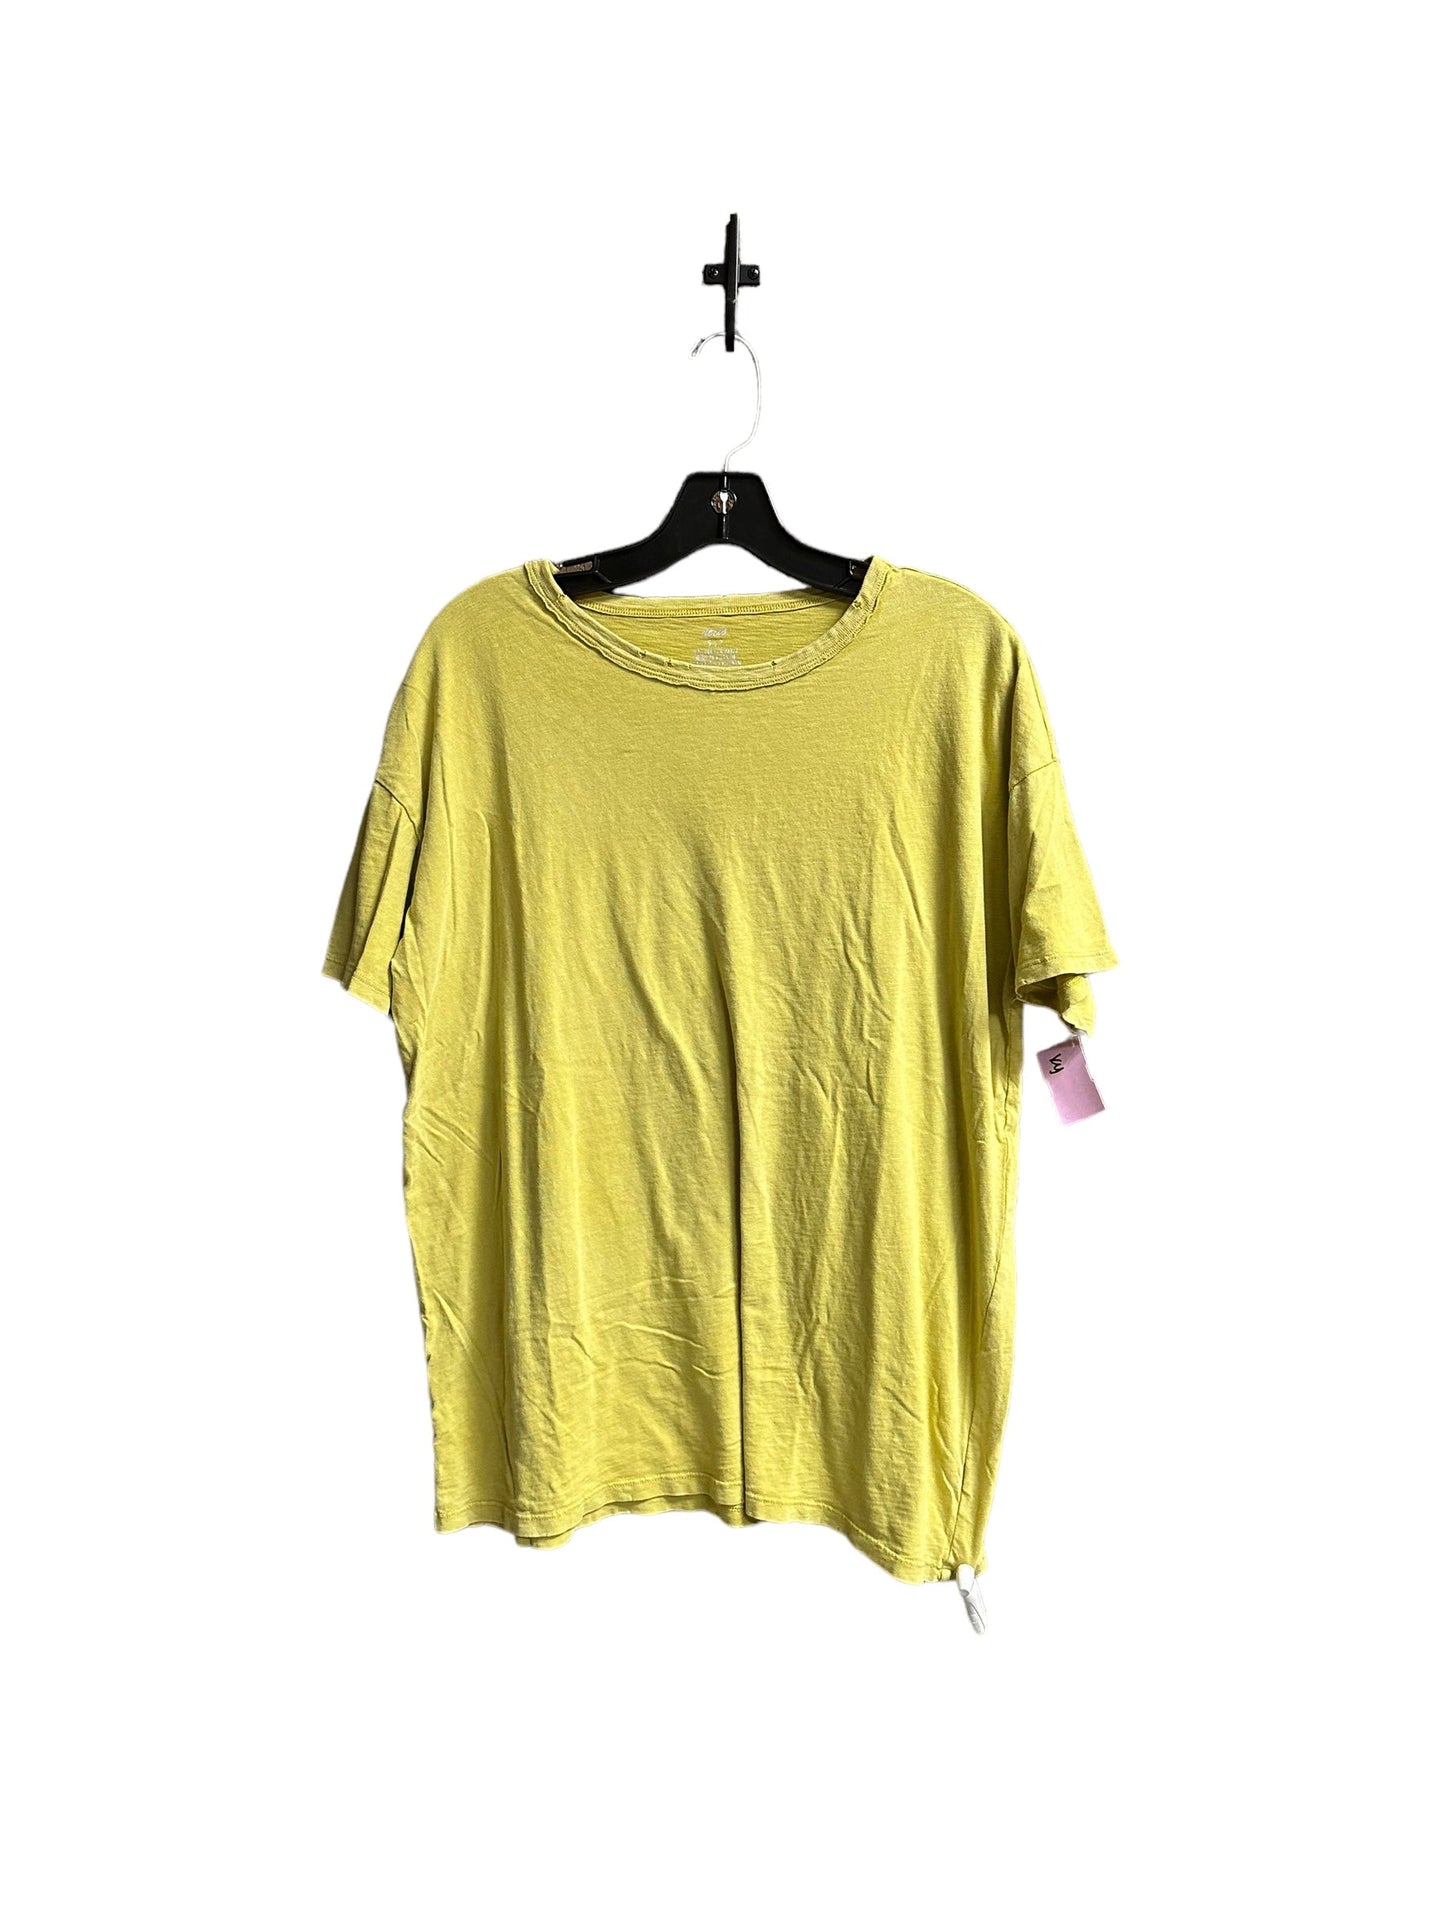 Yellow Top Short Sleeve Basic Aerie, Size S